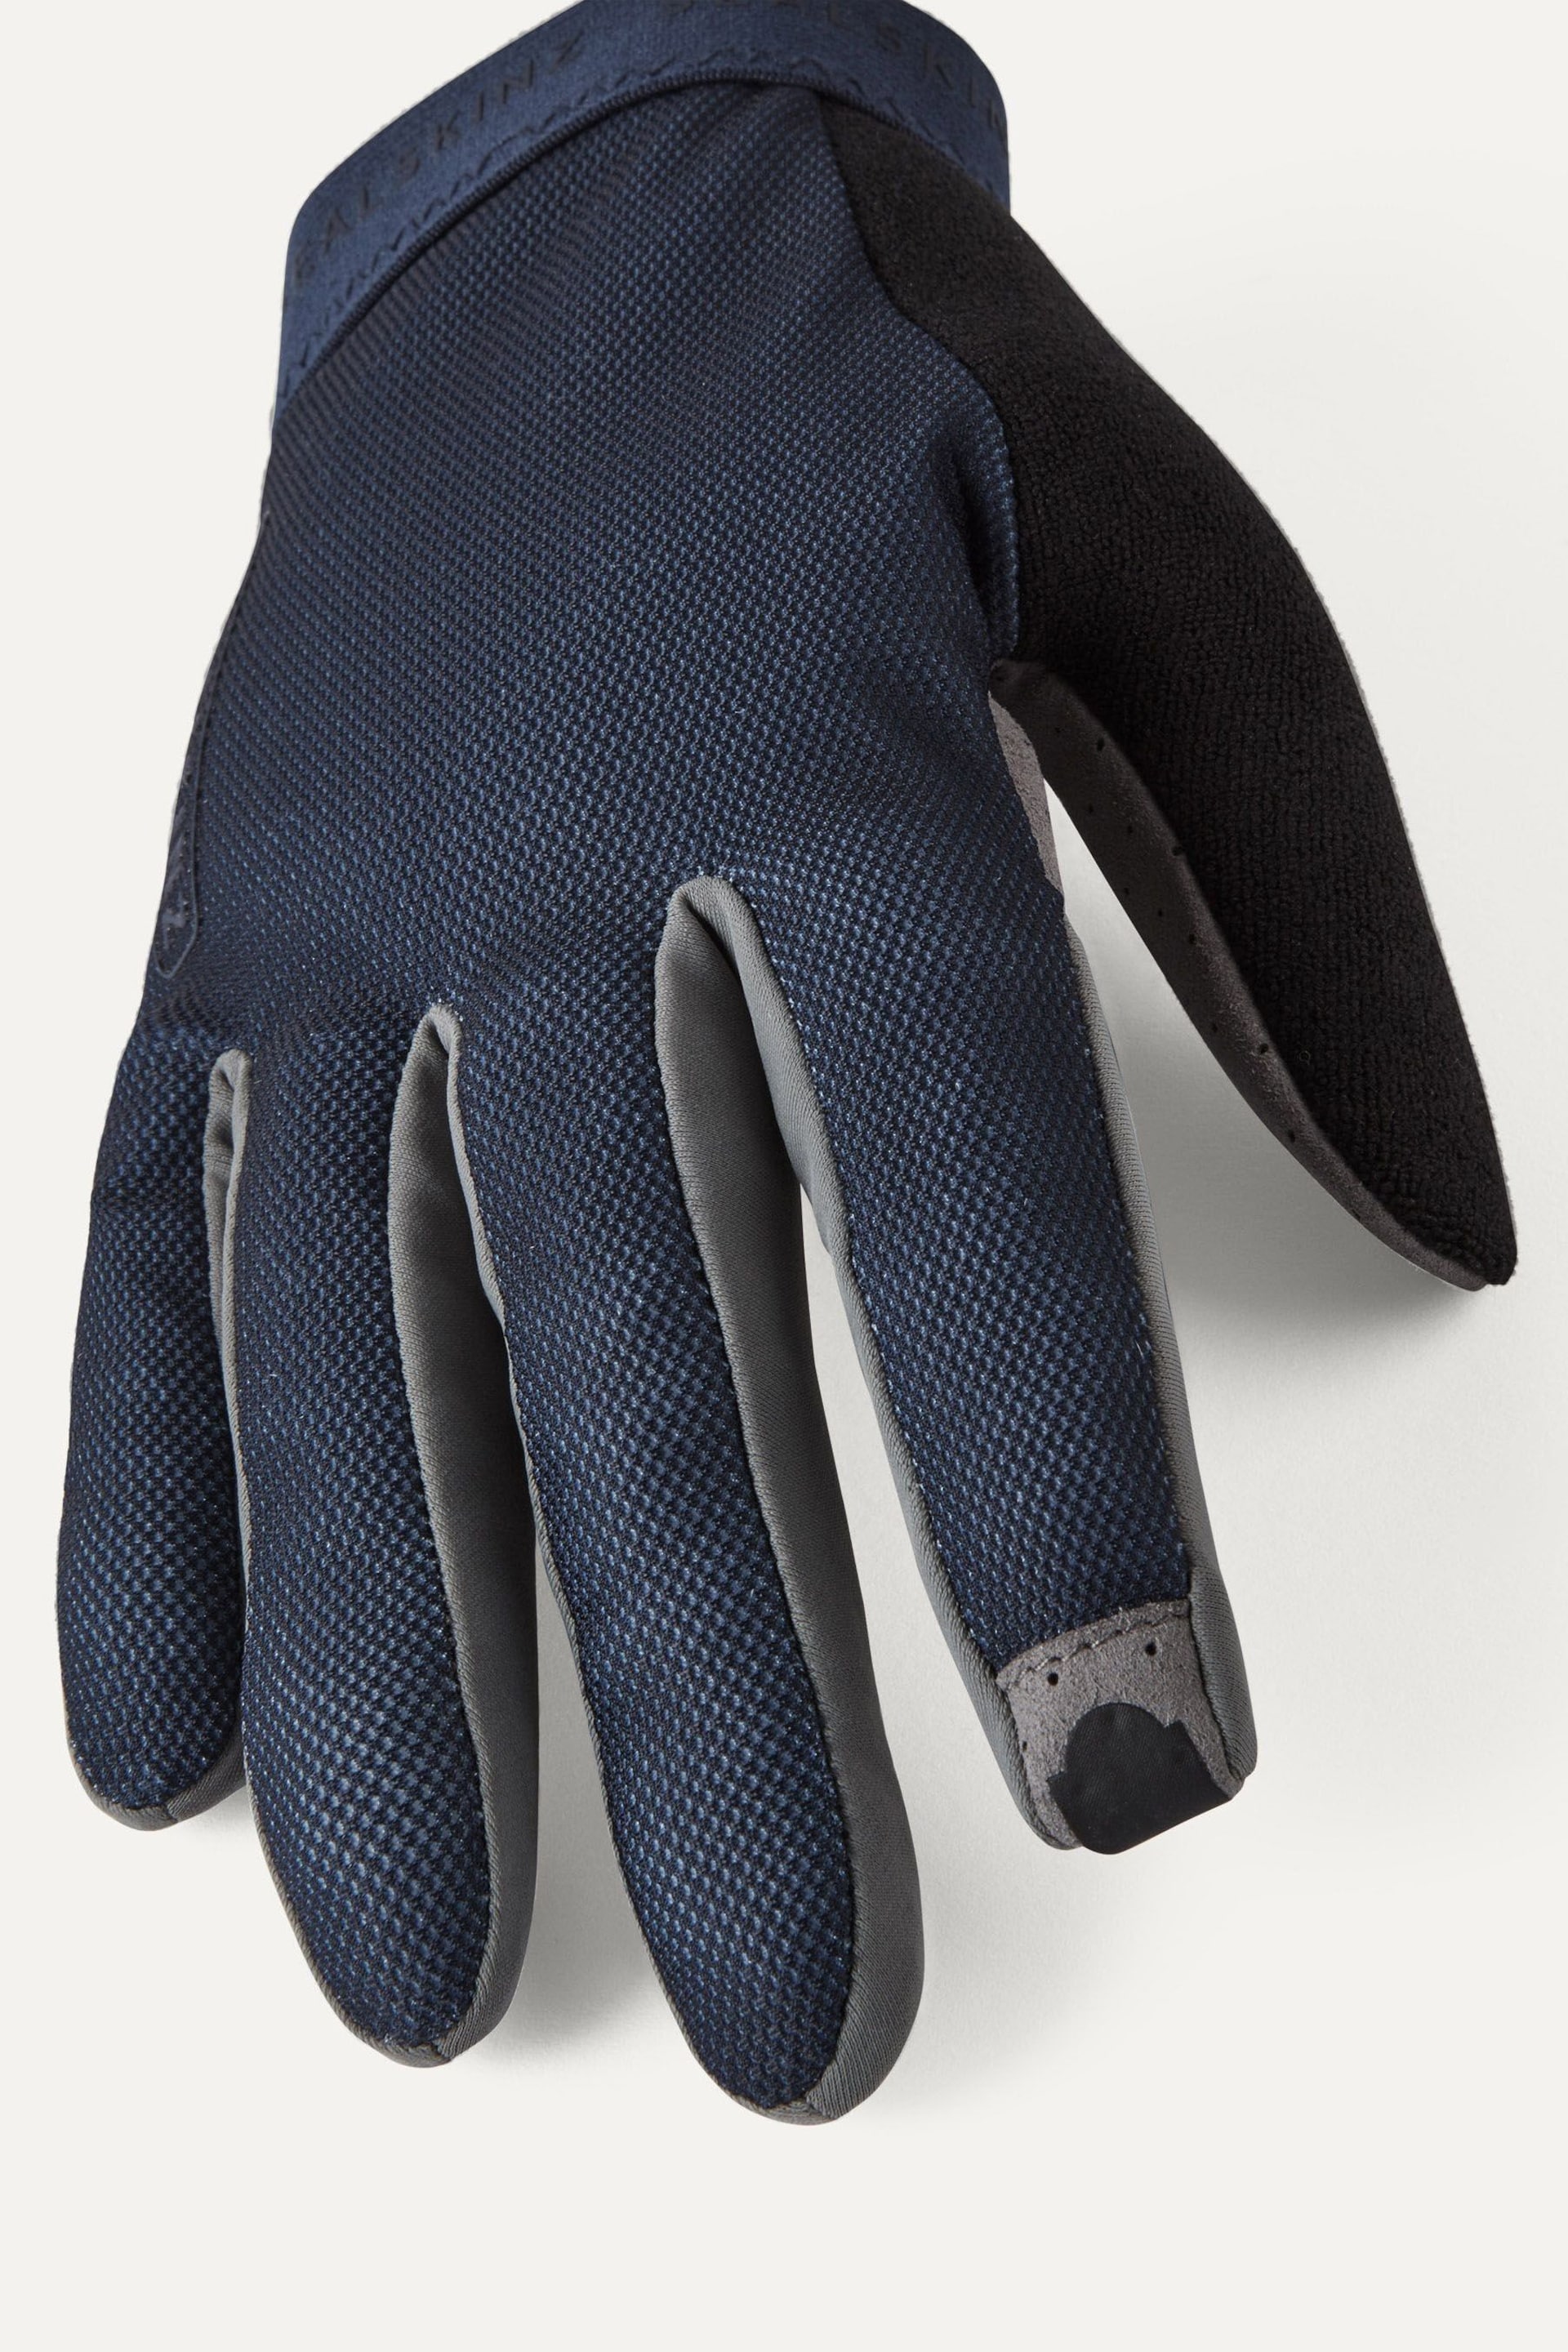 Sealskinz Paston Perforated Palm Gloves - Image 3 of 3